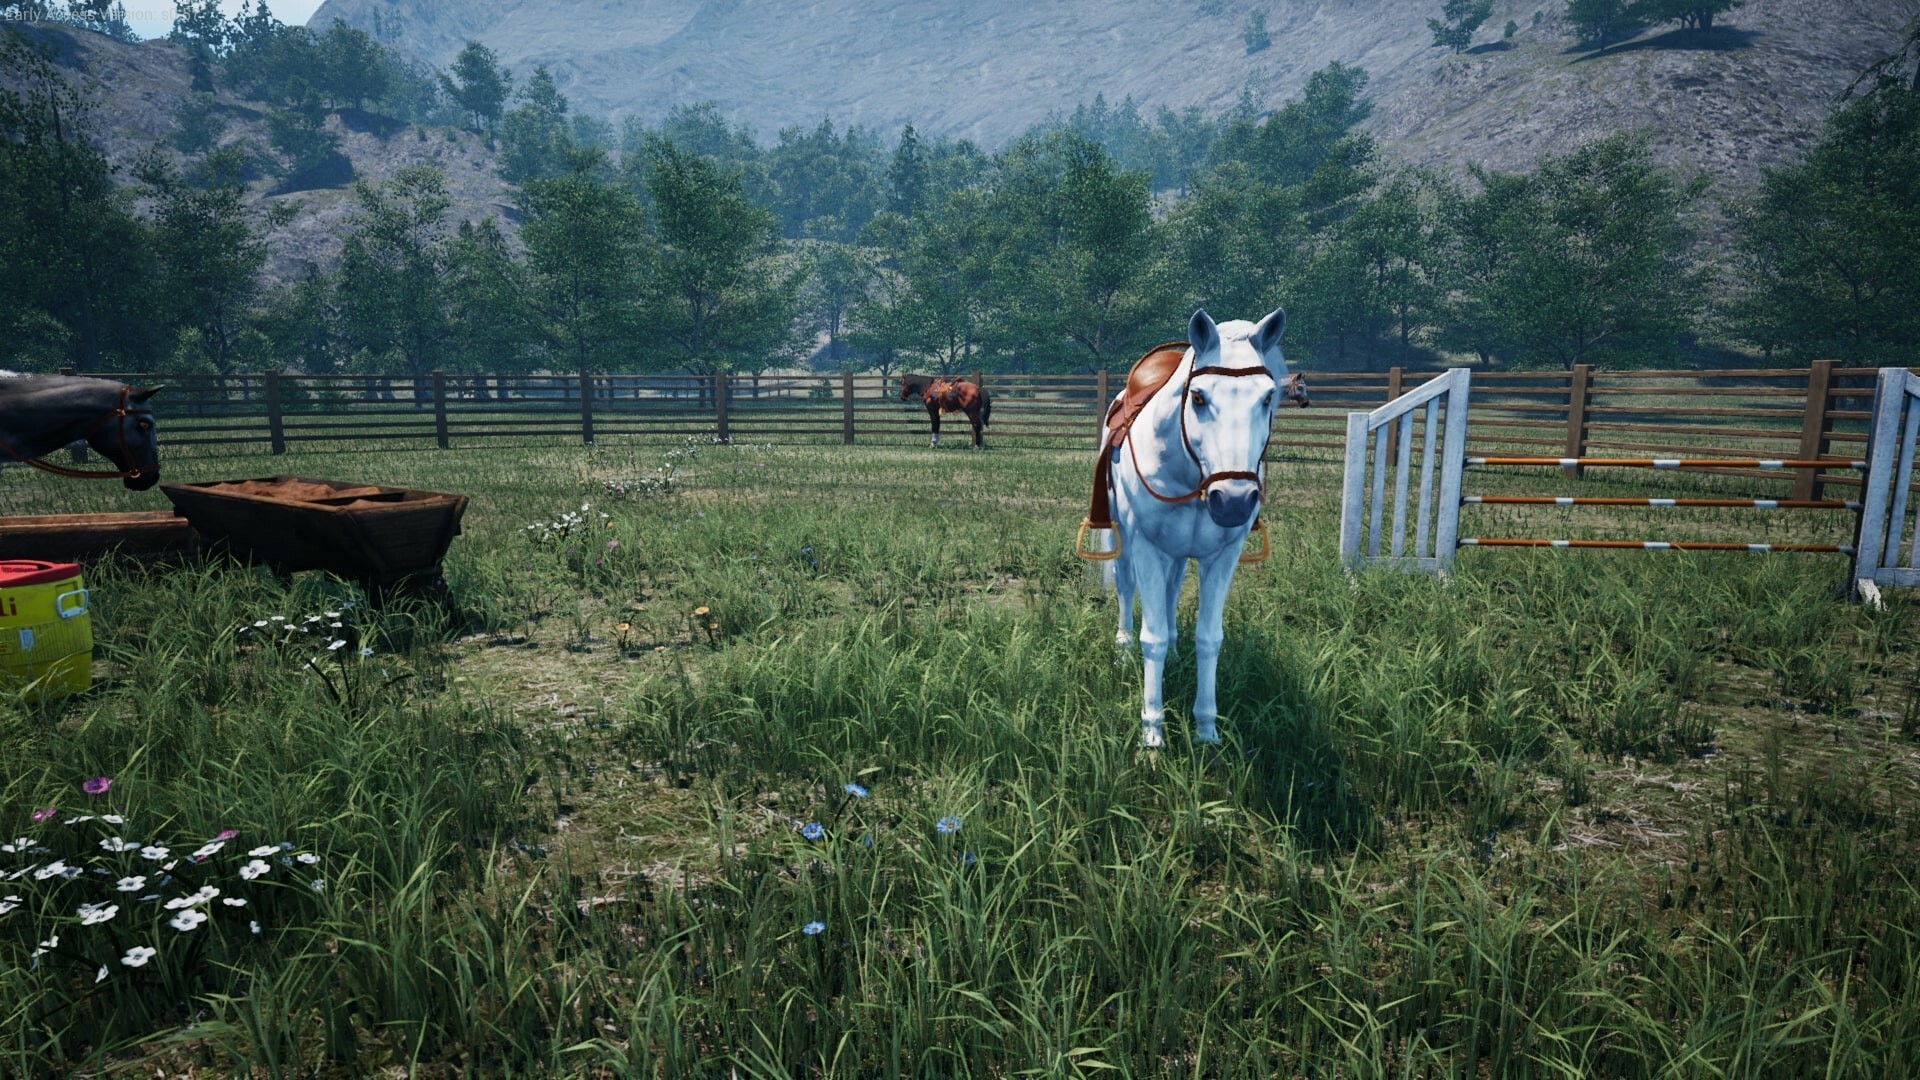 Ranch Simulator - testing and system requirements PC